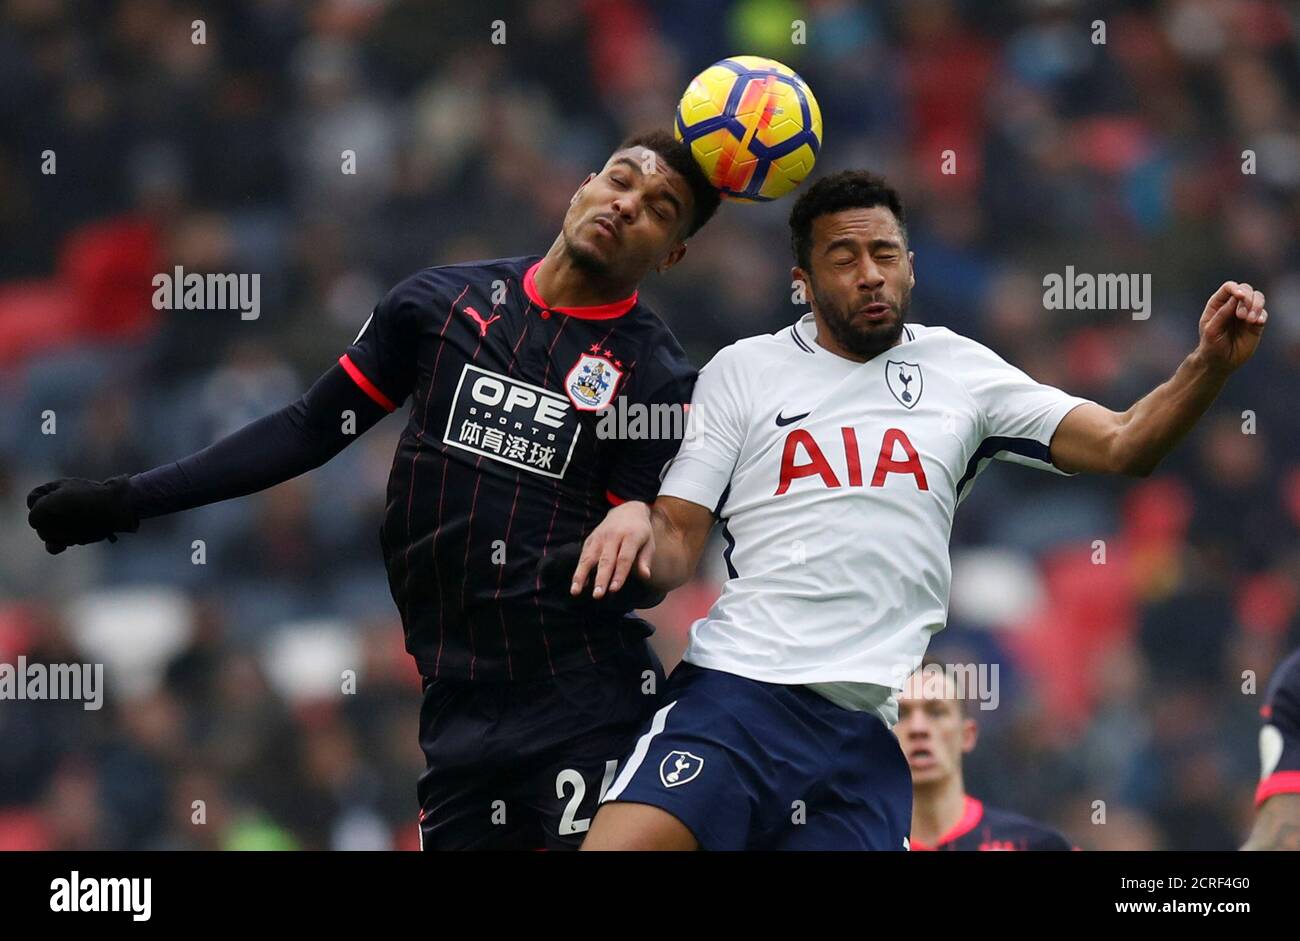 Soccer Football - Premier League - Tottenham Hotspur vs Huddersfield Town - Wembley Stadium, London, Britain - March 3, 2018   Tottenham's Mousa Dembele in action with Huddersfield Town’s Steve Mounie    REUTERS/Eddie Keogh    EDITORIAL USE ONLY. No use with unauthorized audio, video, data, fixture lists, club/league logos or 'live' services. Online in-match use limited to 75 images, no video emulation. No use in betting, games or single club/league/player publications.  Please contact your account representative for further details. Stock Photo